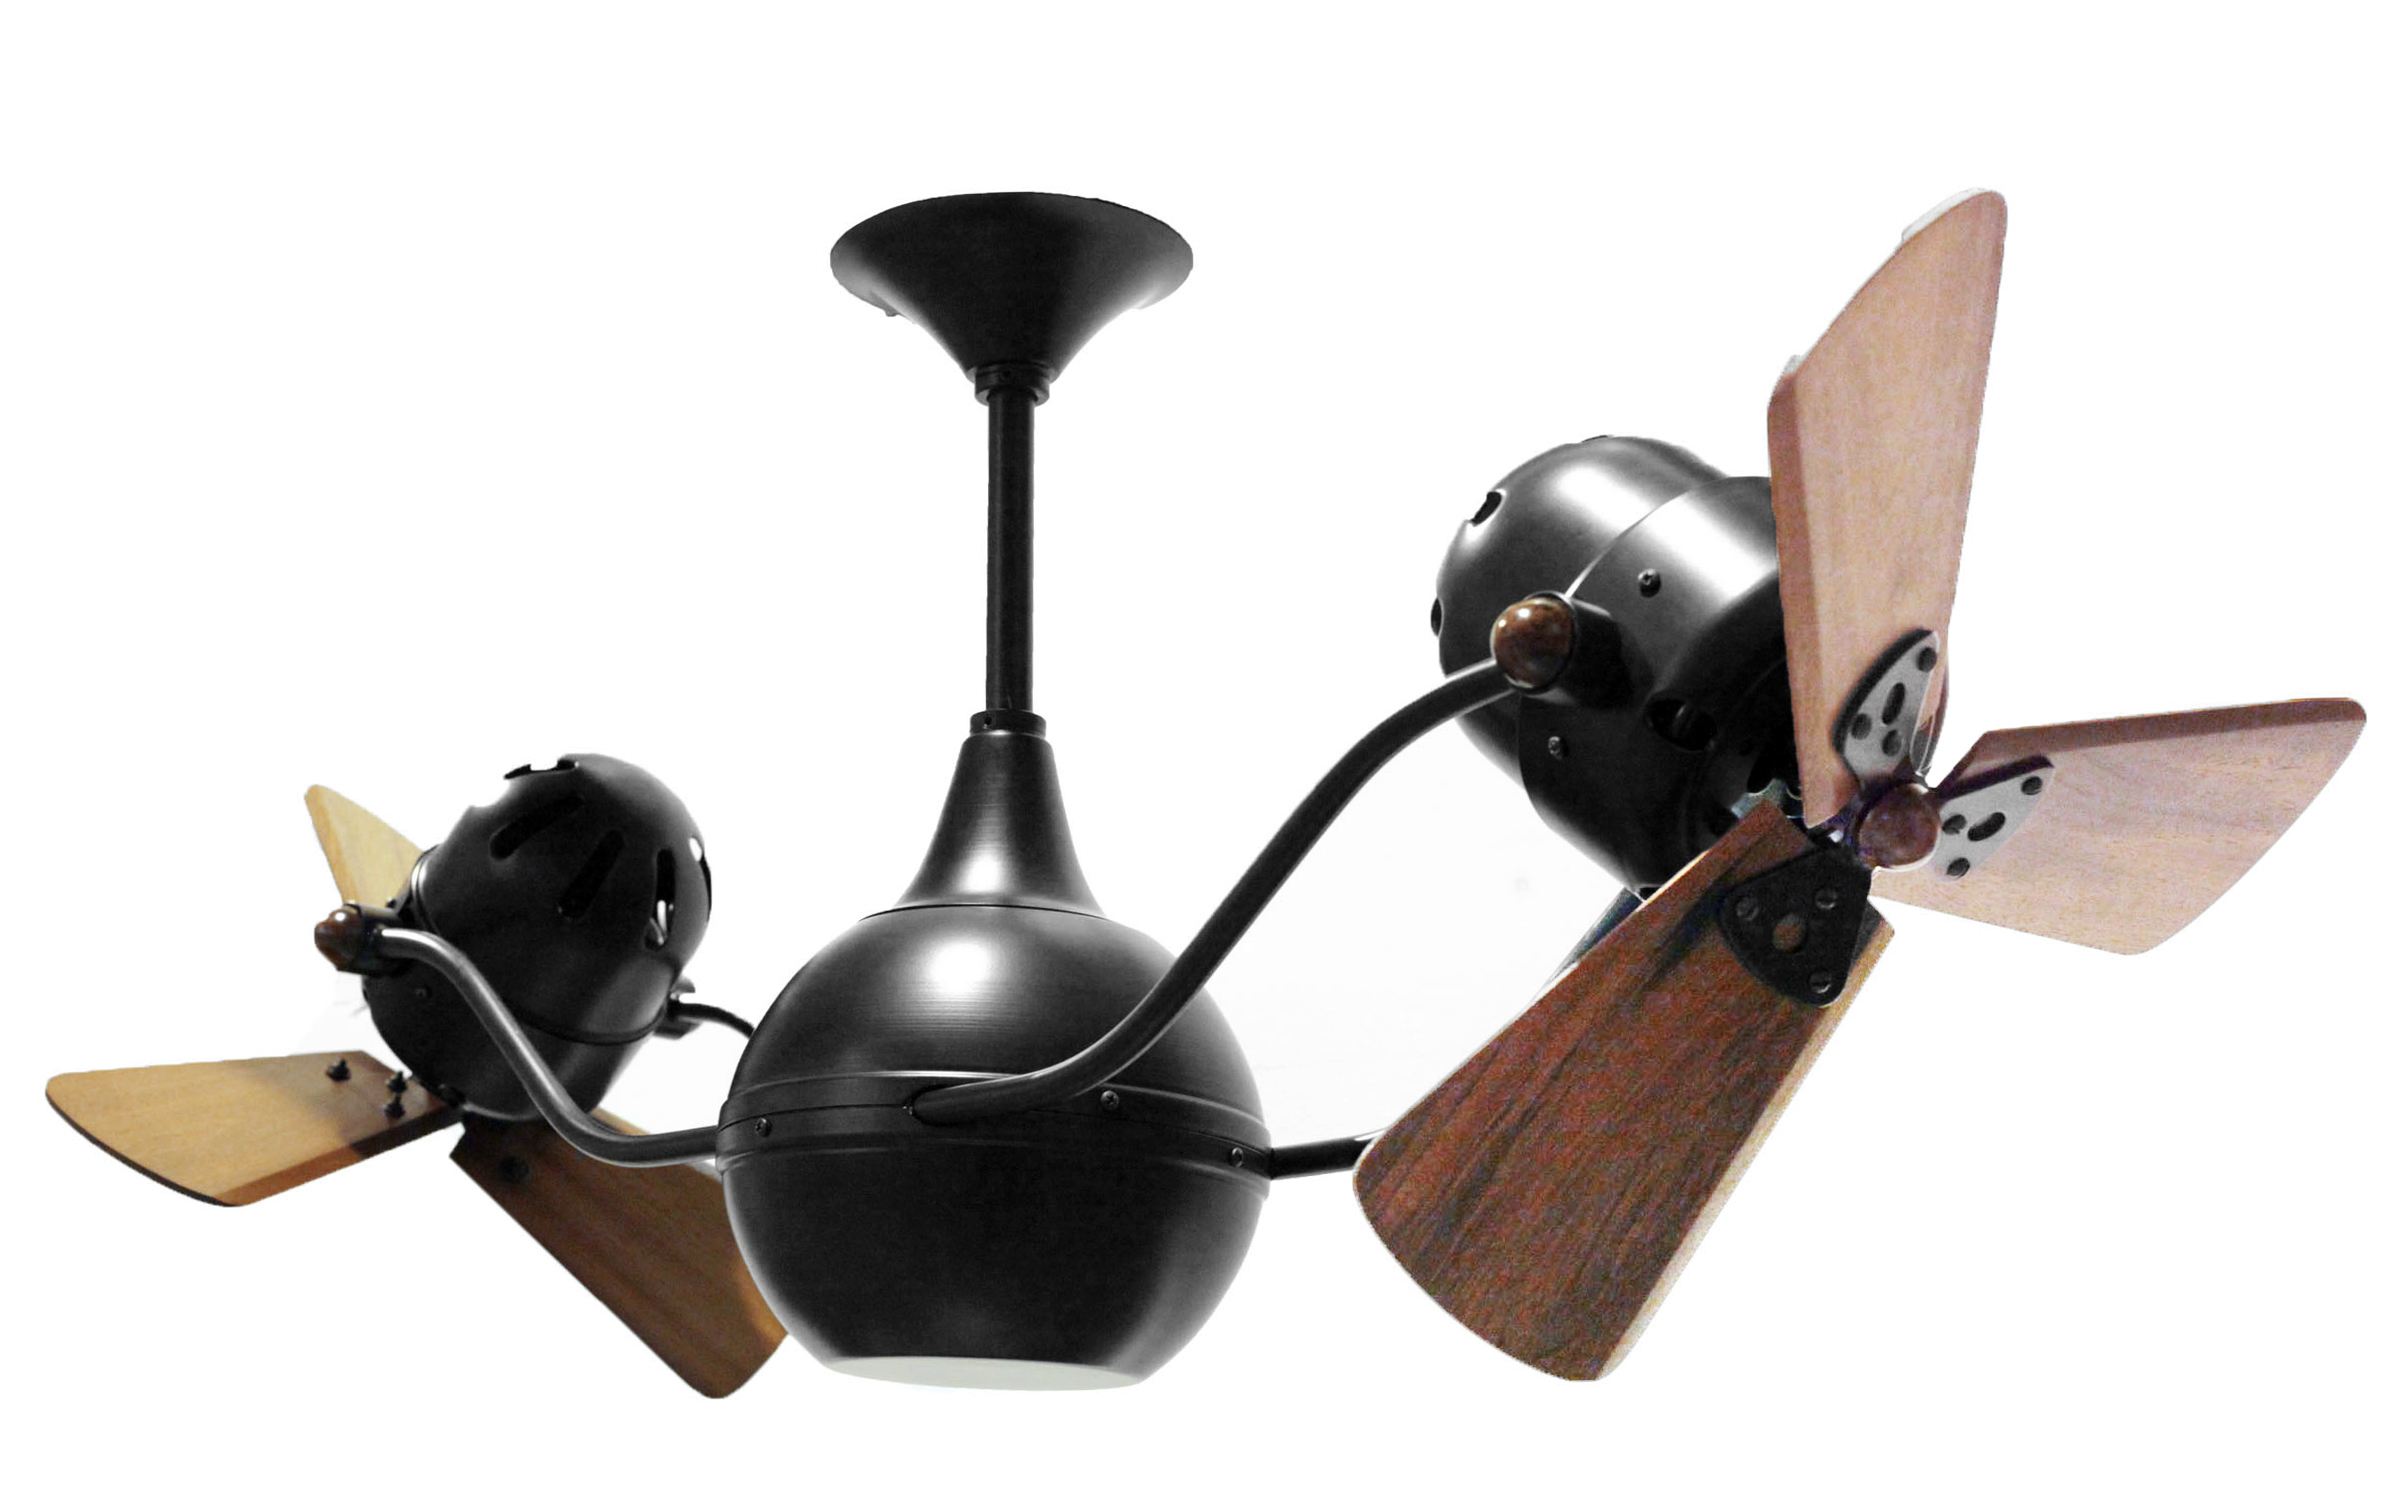 Vent-Bettina Rotational Dual Head Ceiling Fan in Black Finish with Mahogany Wood Blades